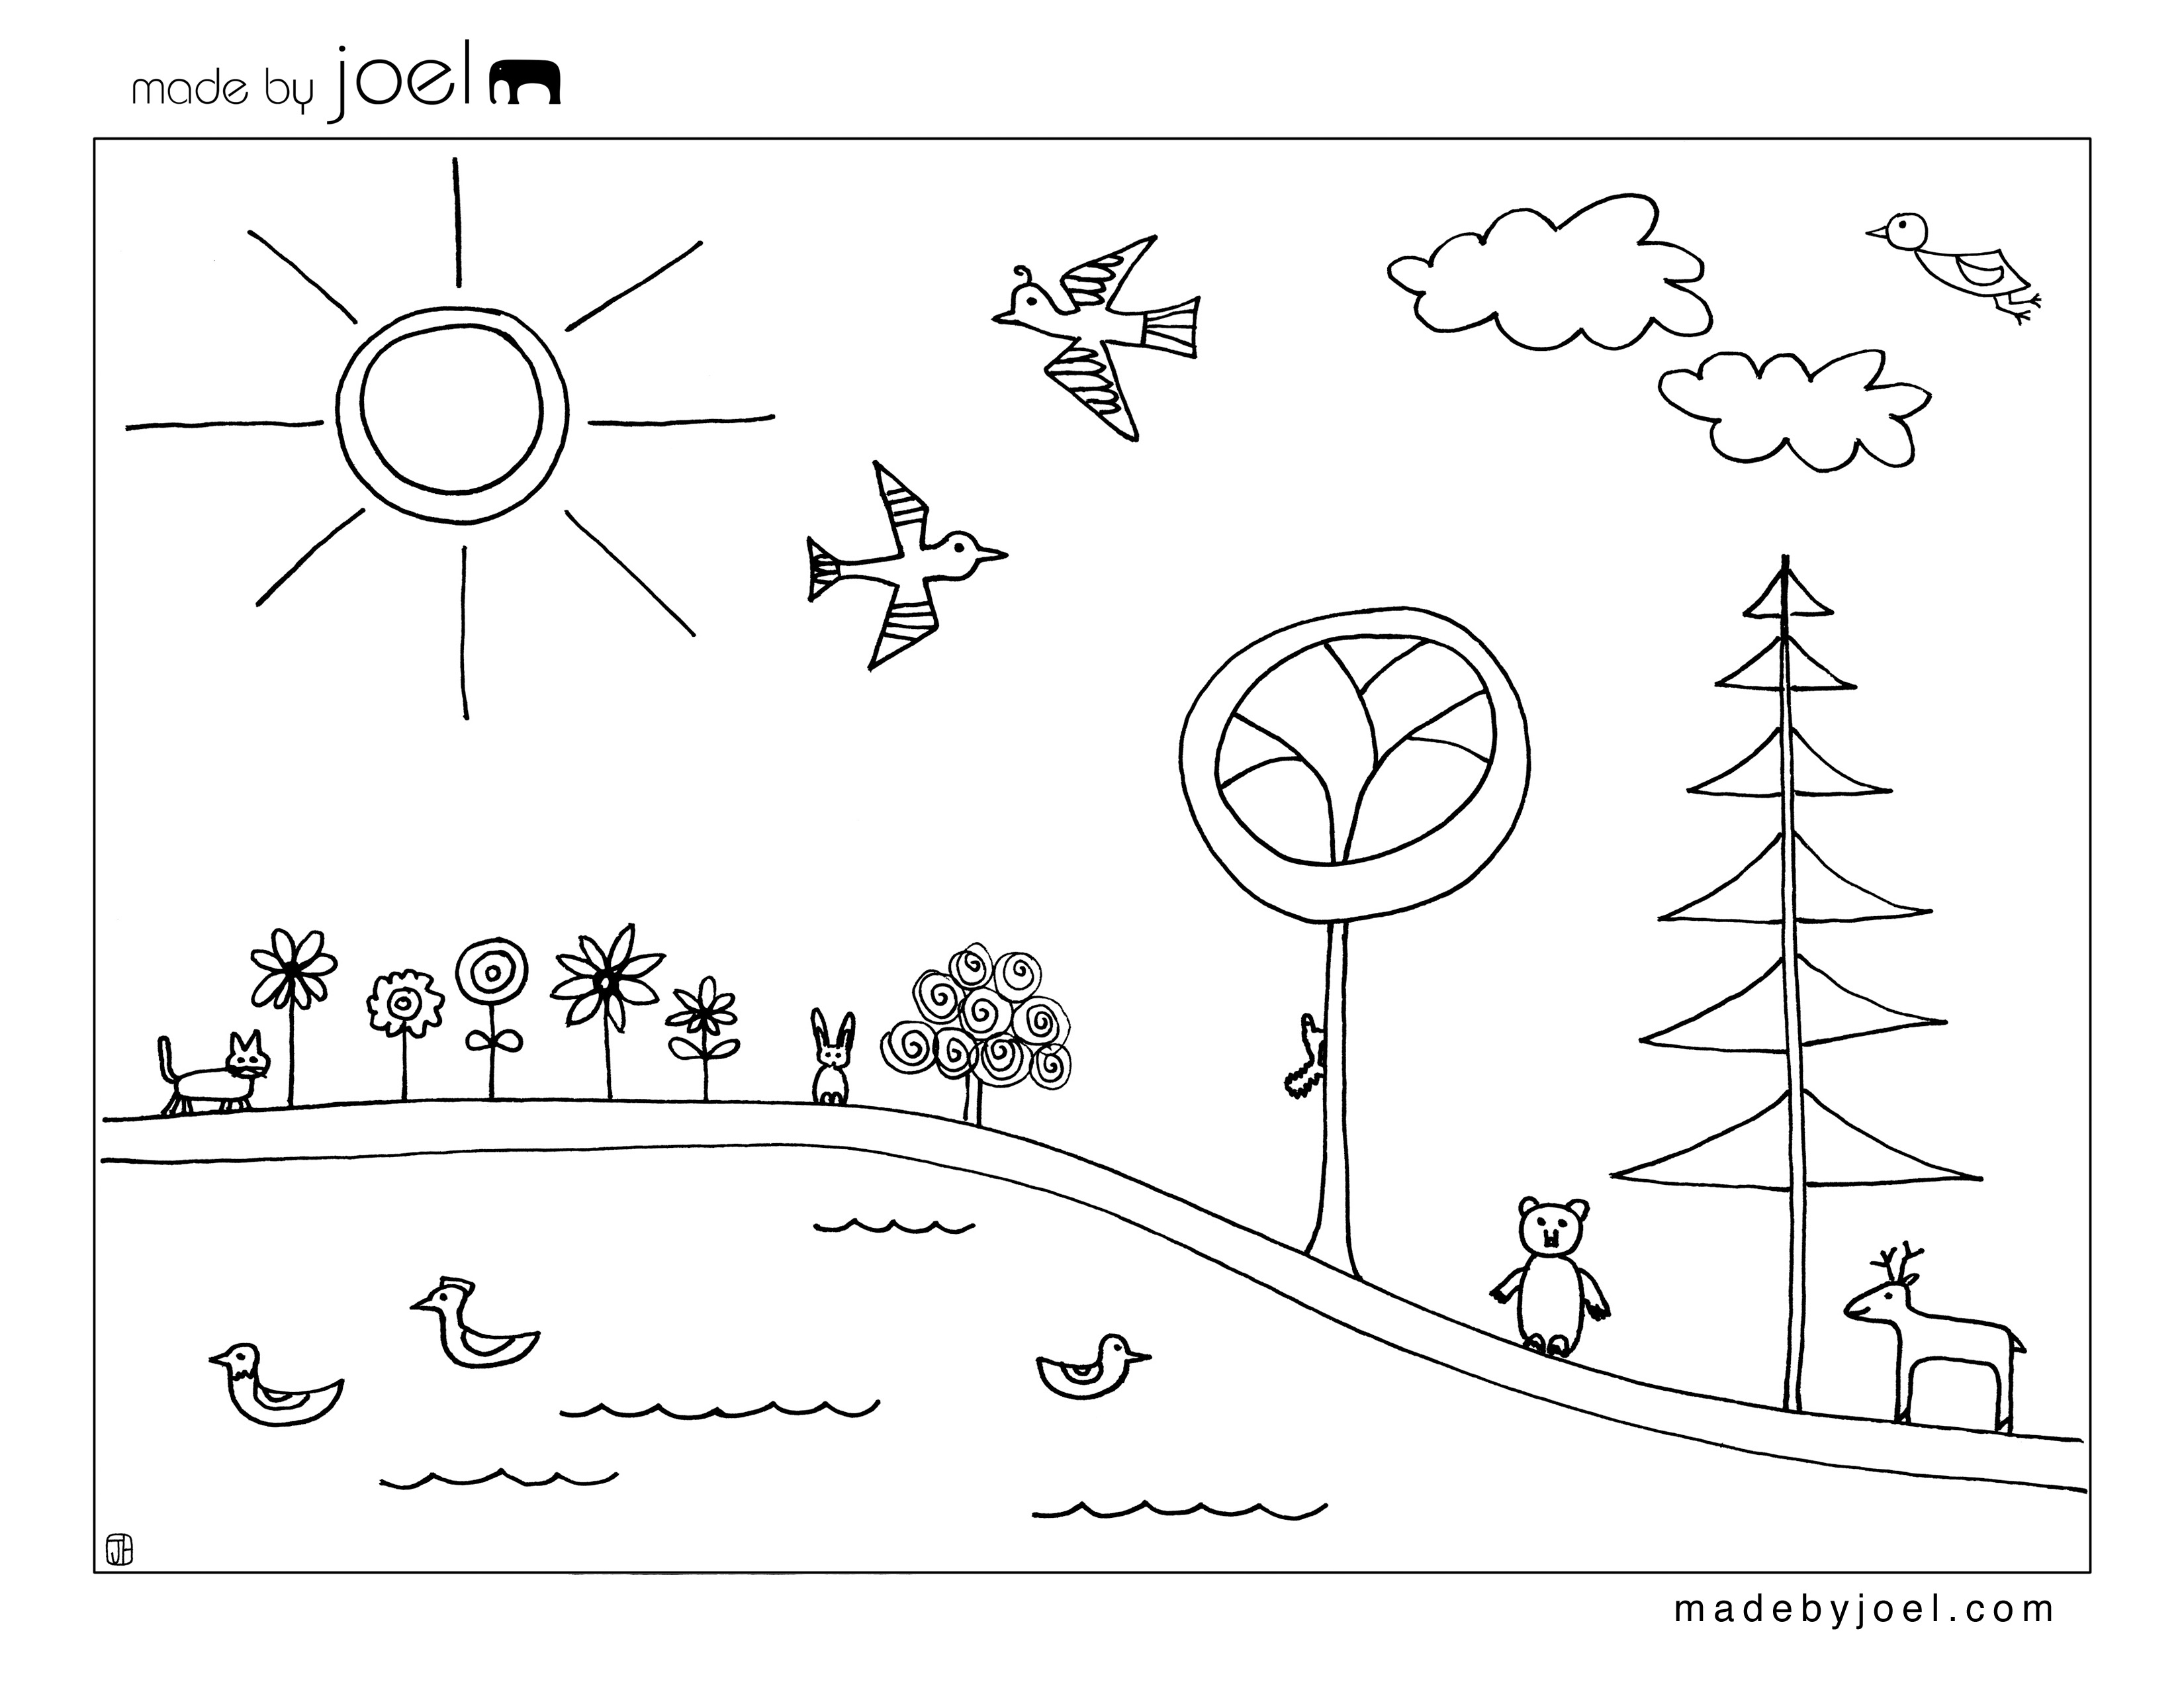 Free Printable Earth Day Coloring Sheets Image